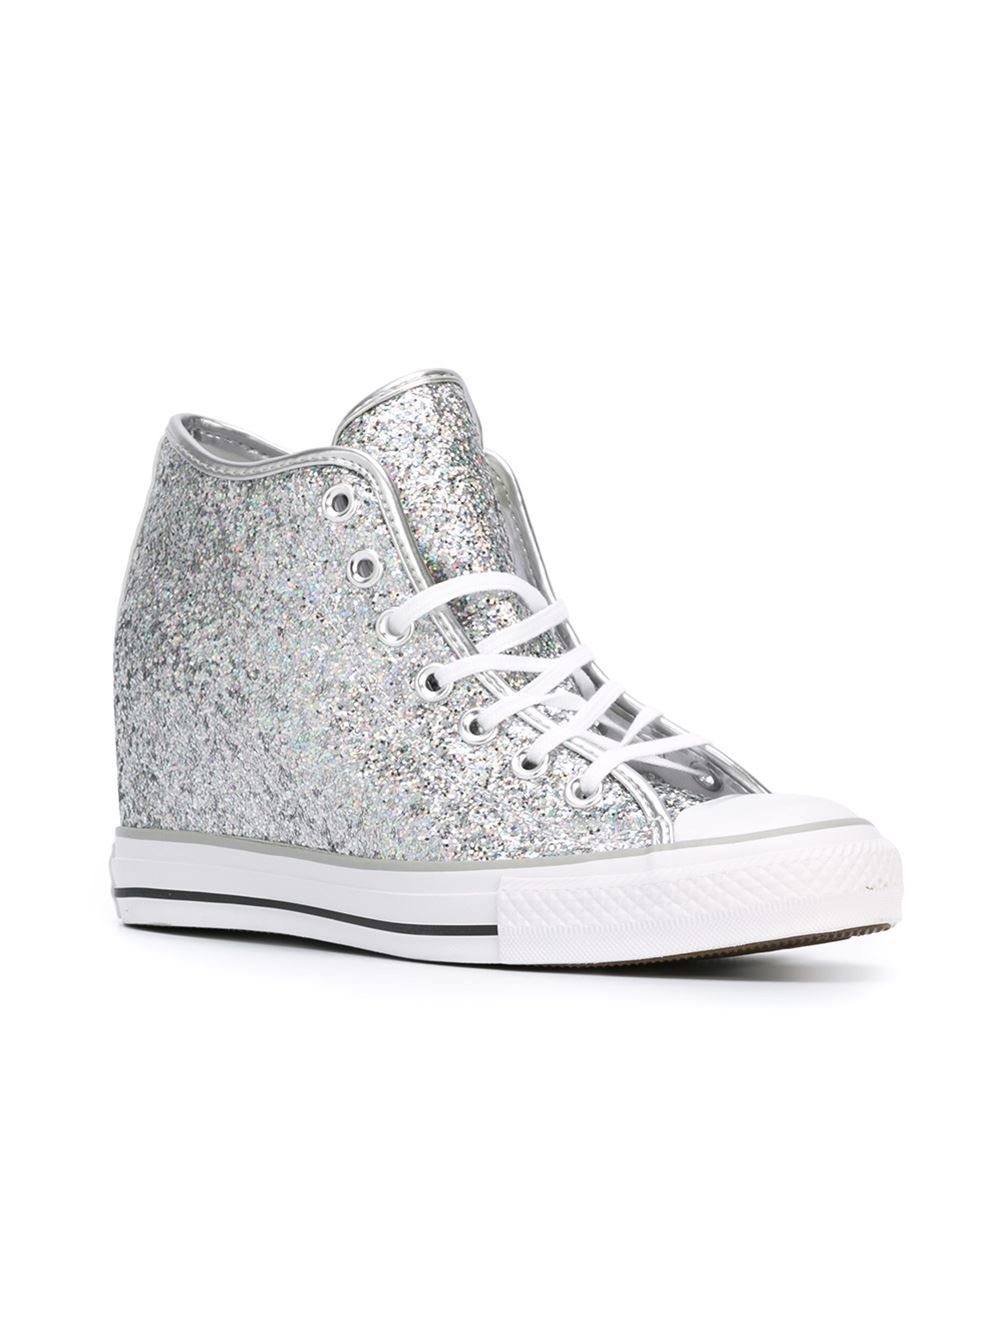 Converse High Top Concealed Wedge Sneakers in Silver (GREY) | Lyst